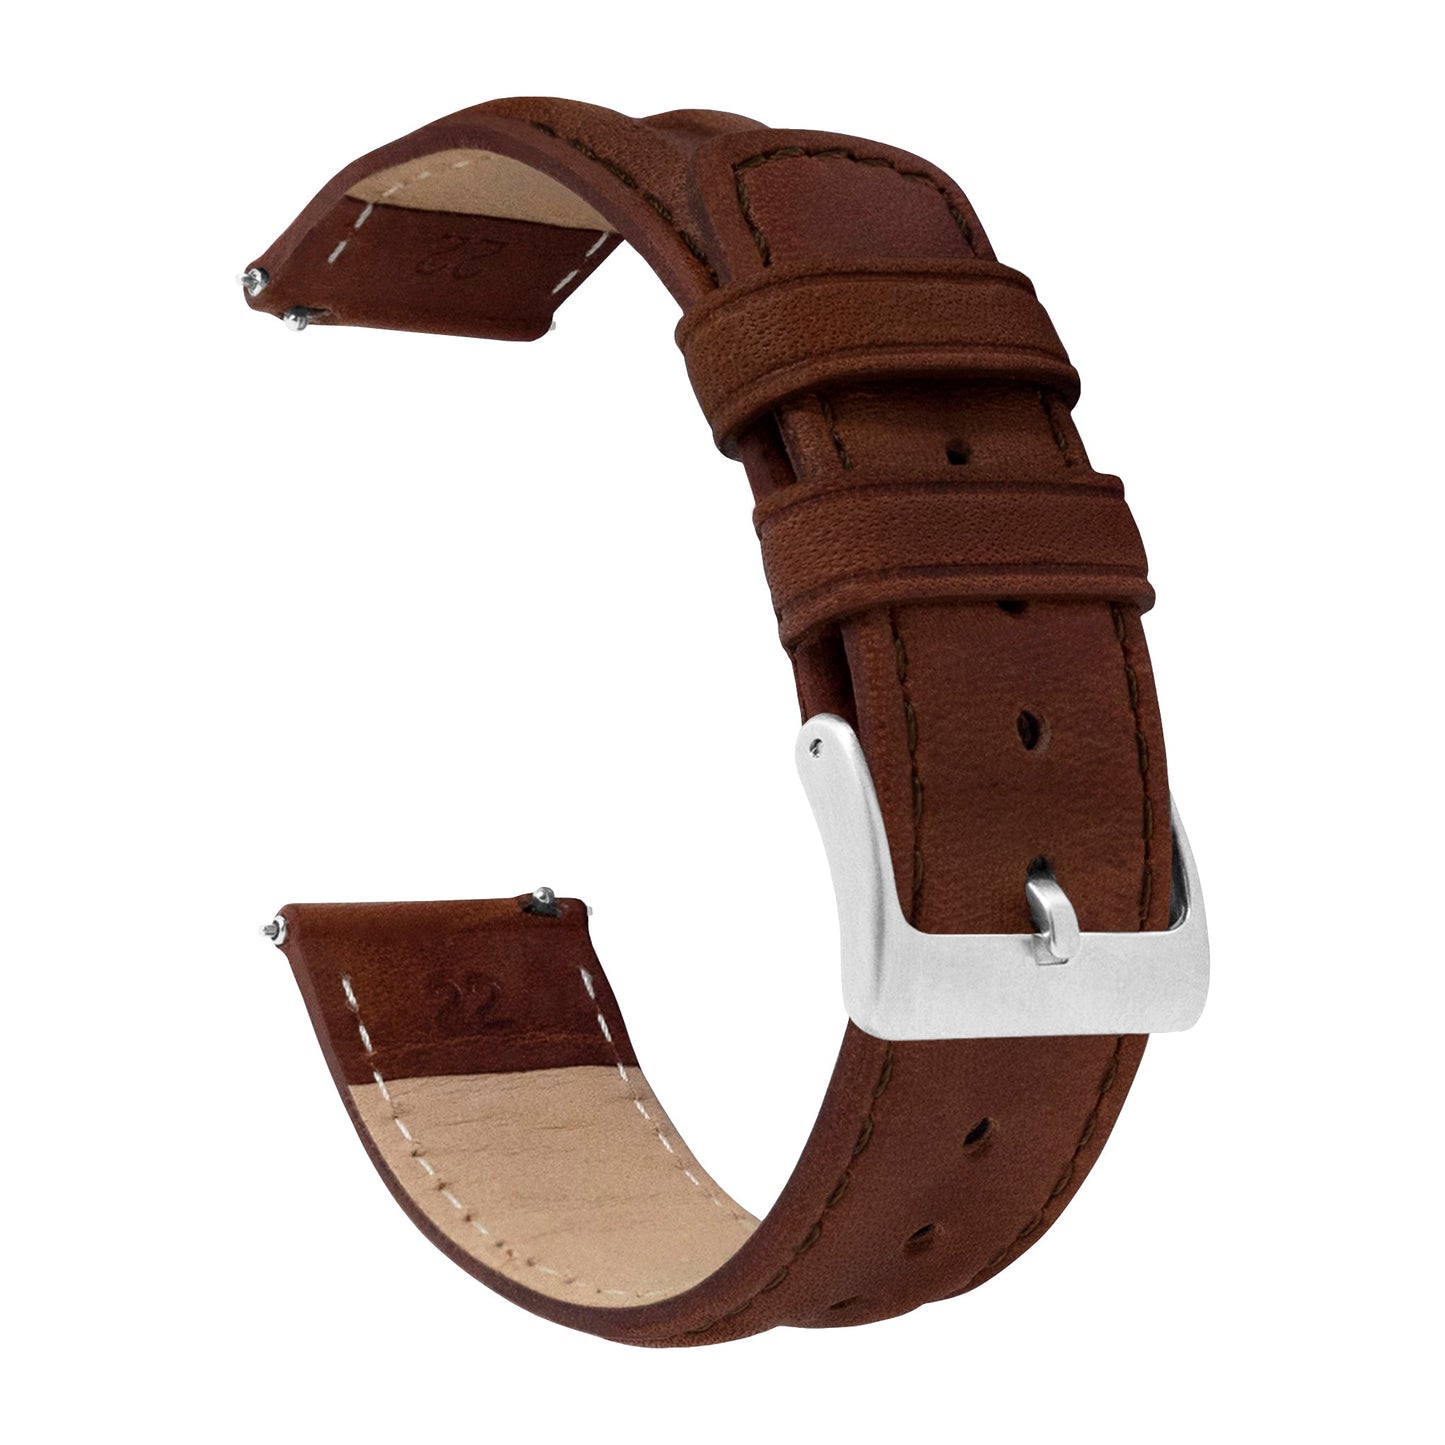 Samsung Galaxy Watch Active | Classic Horween Leather | Chocolate Brown - Barton Watch Bands